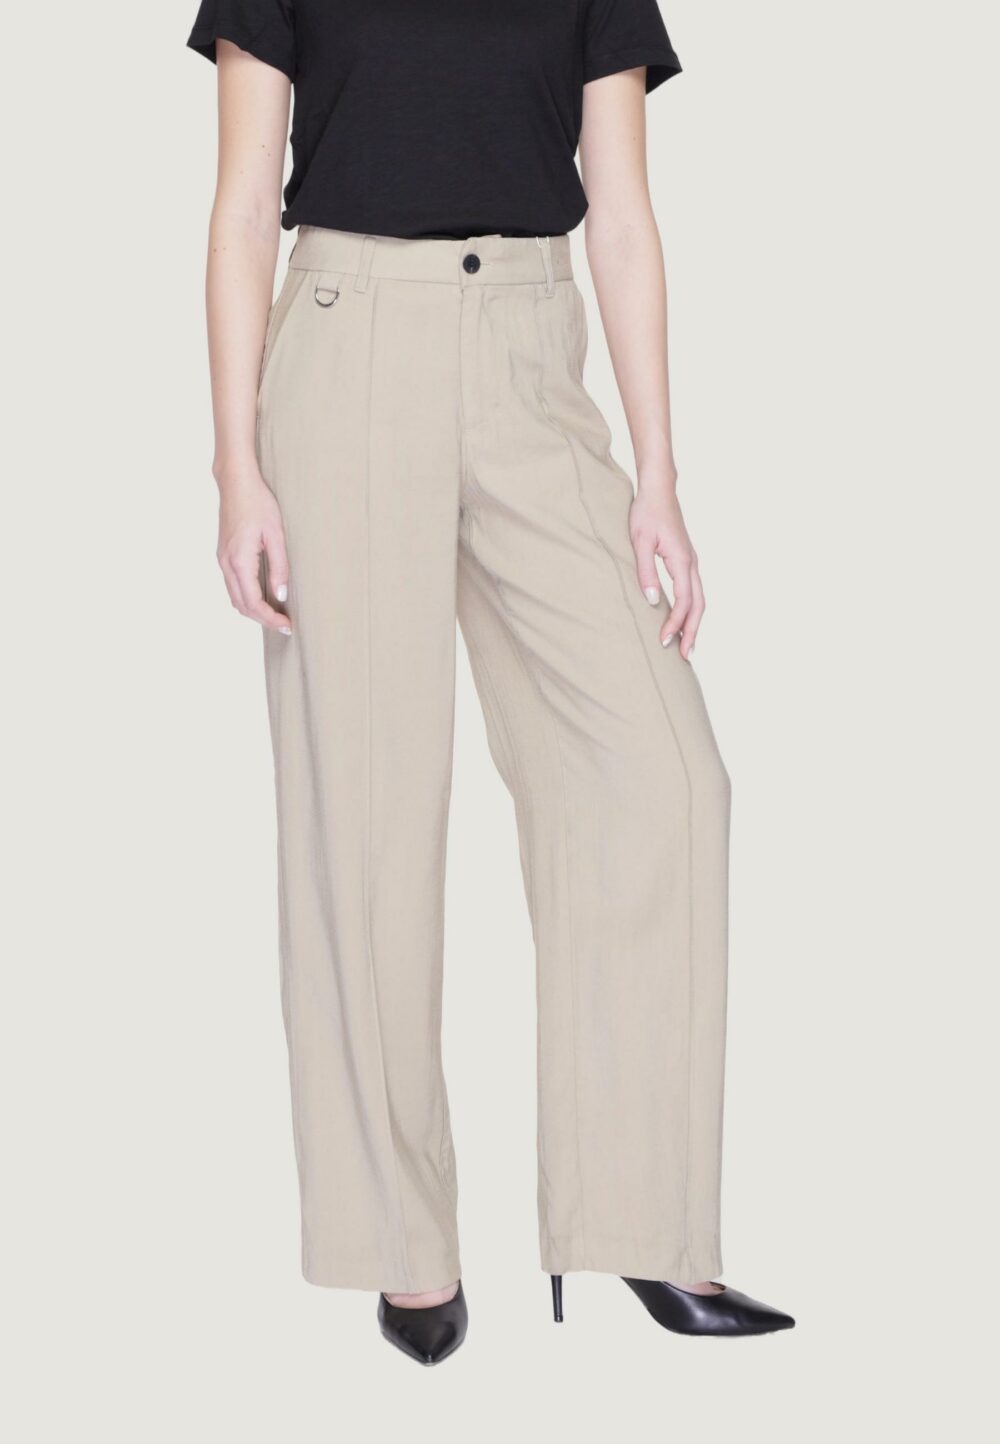 Pantaloni a palazzo Only Onlaris Life Hw Wide Tlr Beige scuro - Foto 3